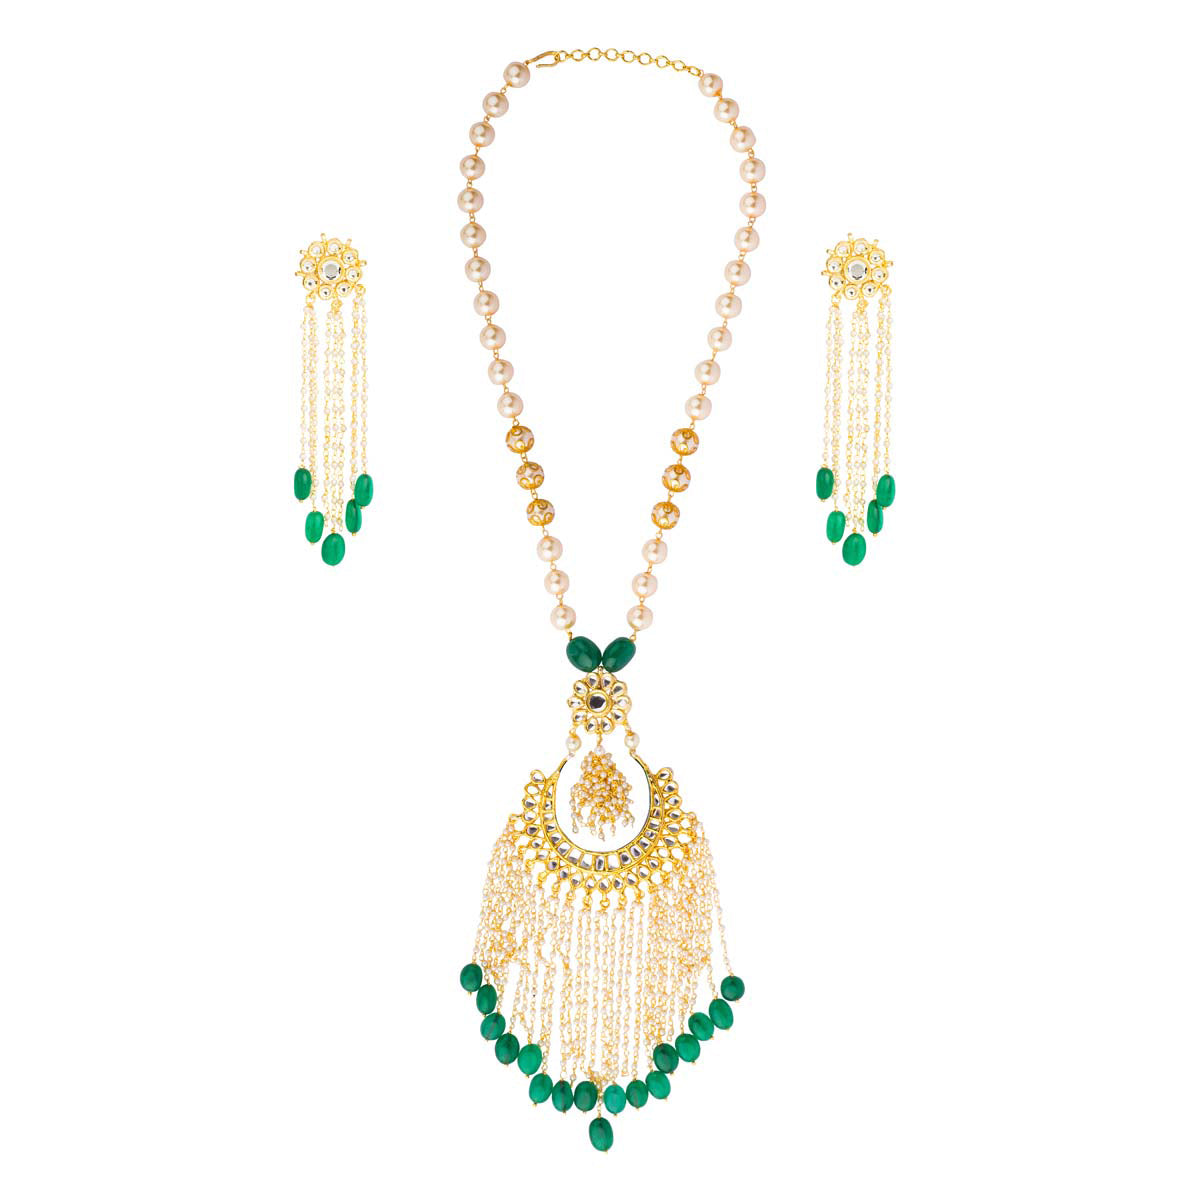 Look euphoric and perfectly put together in this complete set of a necklace & earrings set in kundan with pearl and green stone tassels.